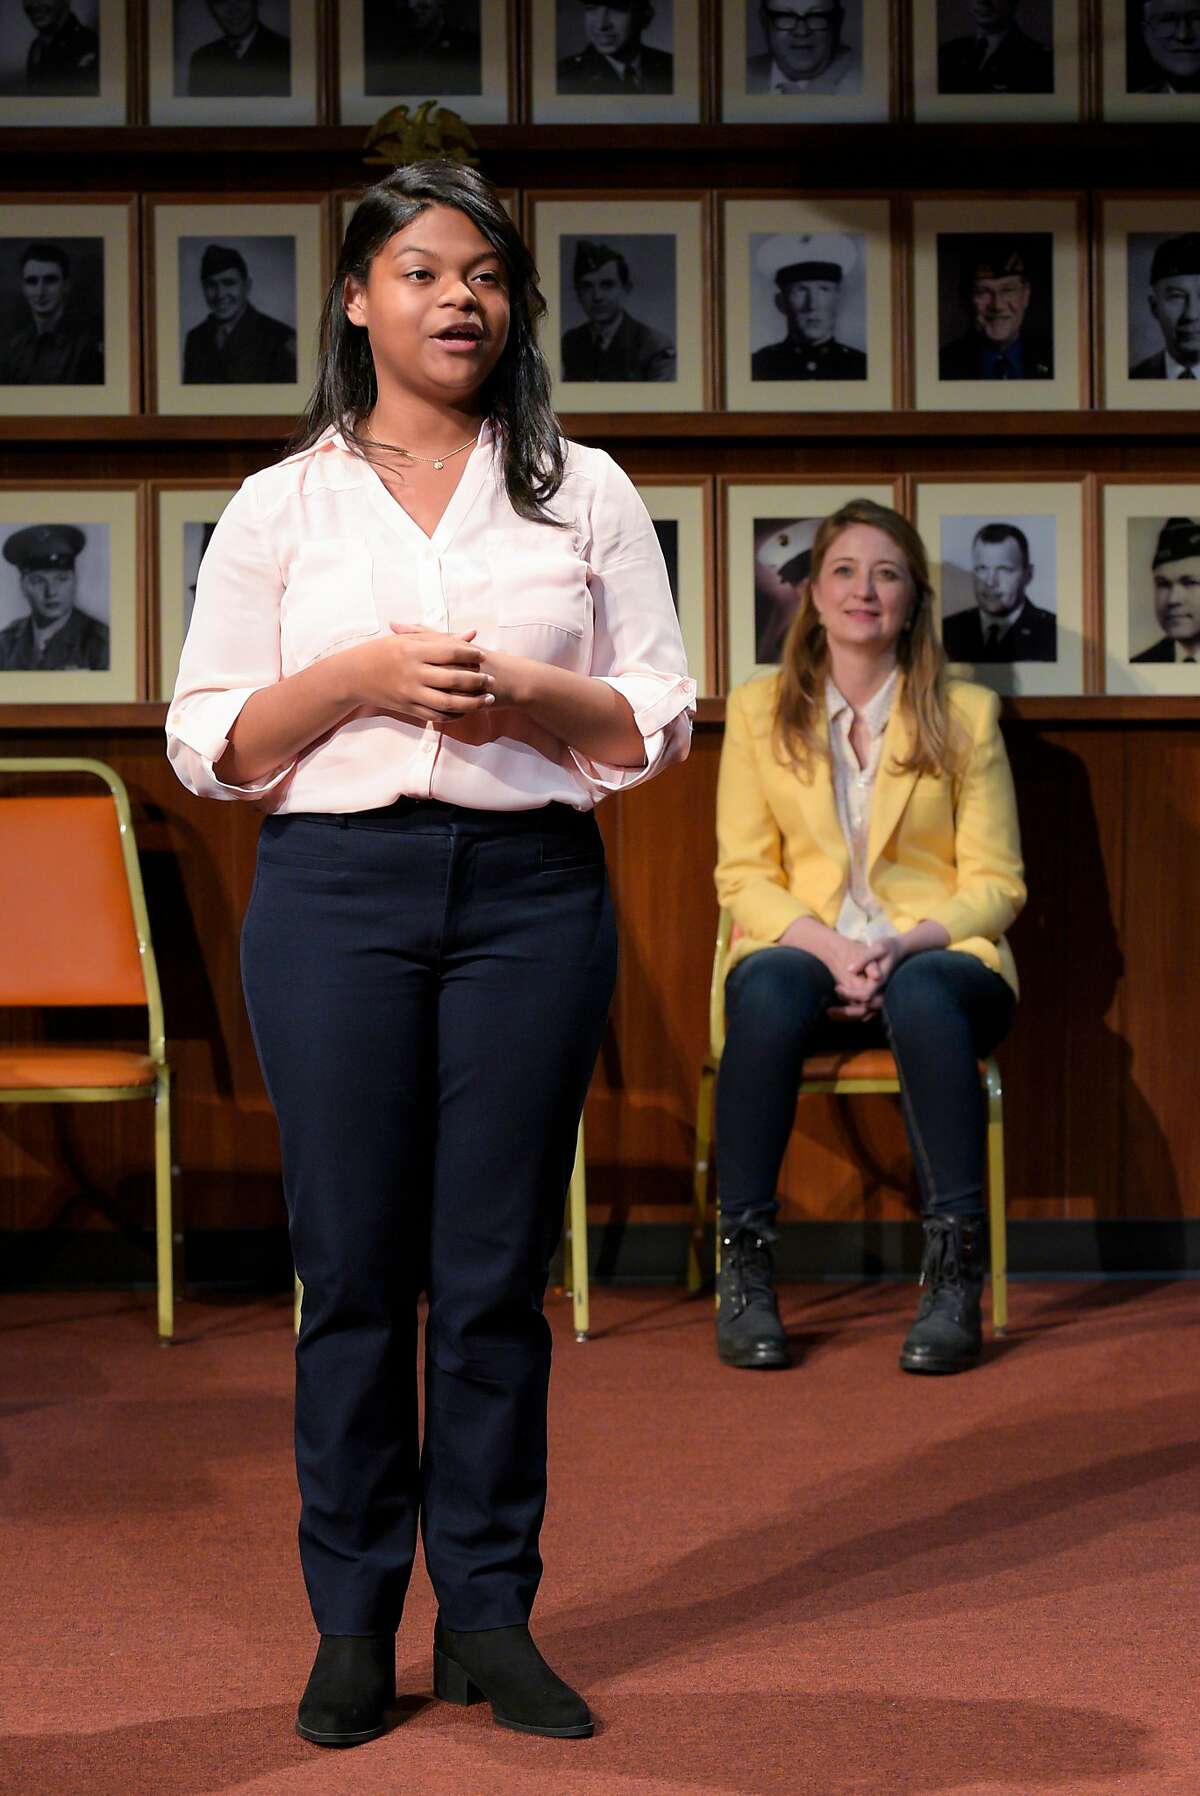 From left: Wisdom Kunitz as Wisdom and Heidi Schreck as Heidi in "What the Constitution Means to Me" at Berkeley Rep.